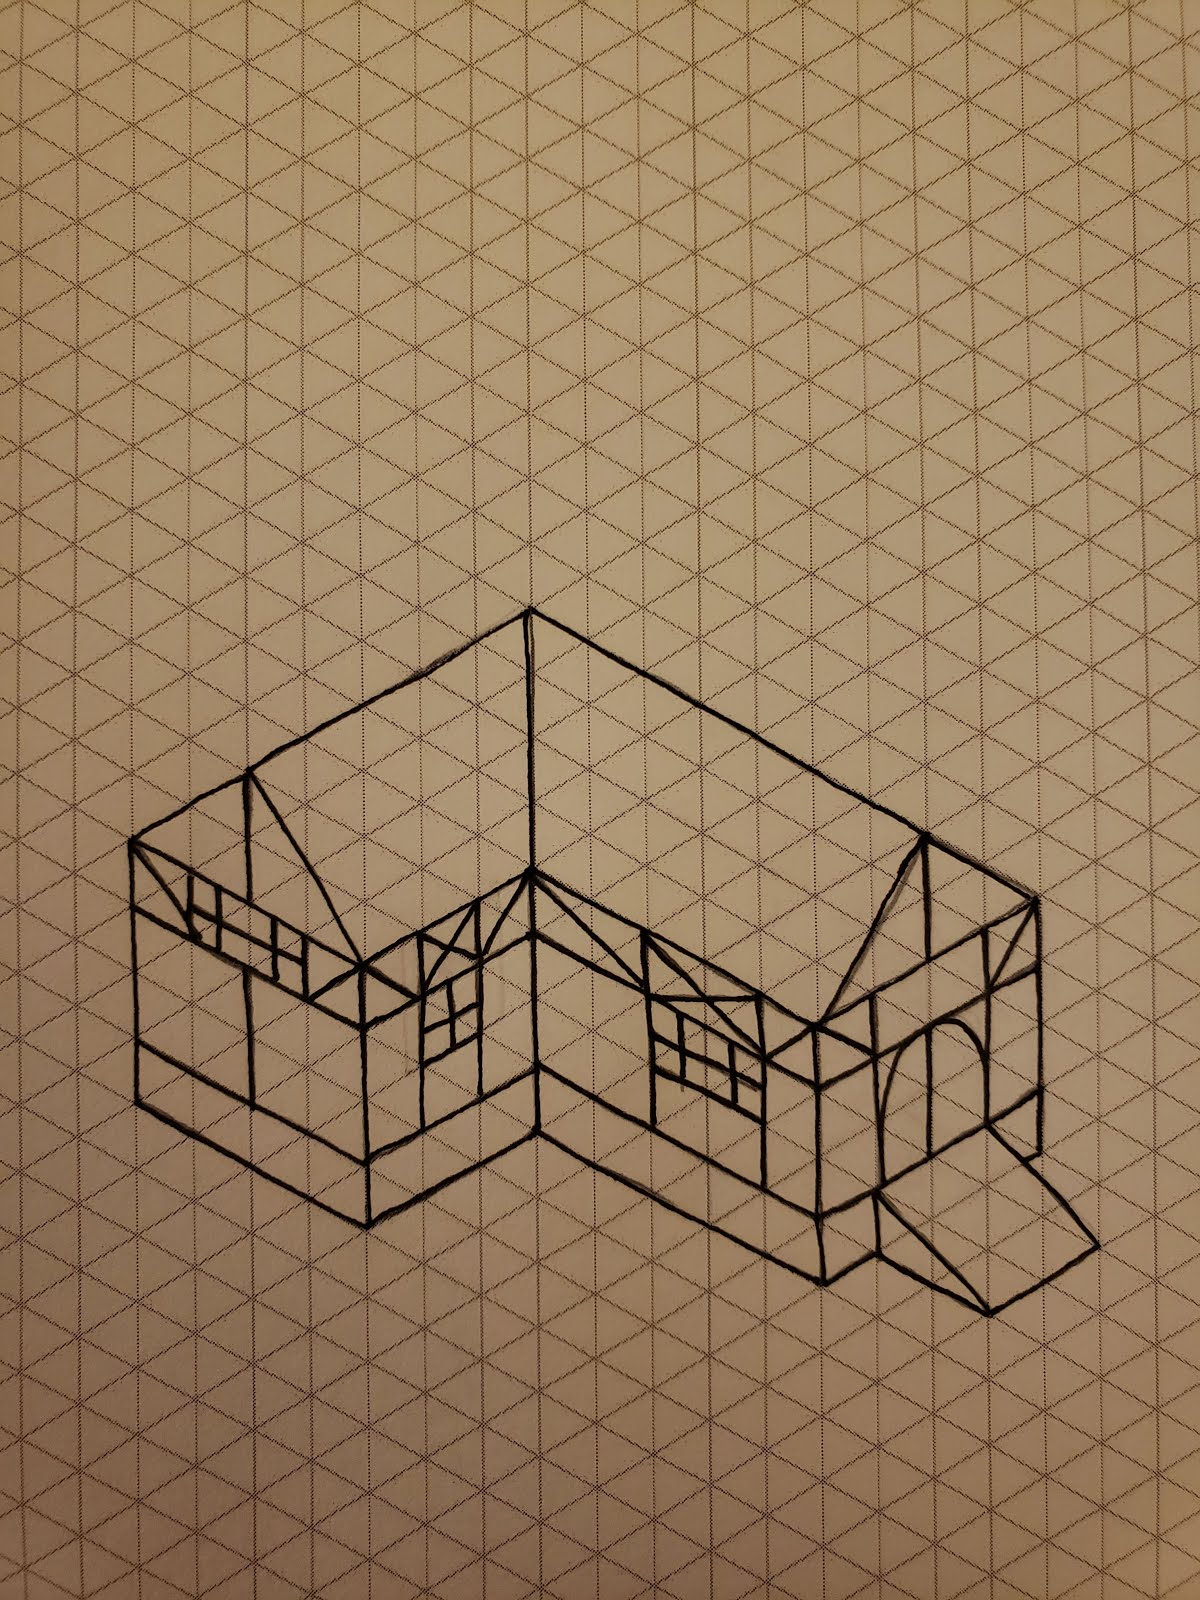 STAGES PROMOTIONAL PACKAGING IN ISOMETRIC PROJECTION SKETCH BY HAND